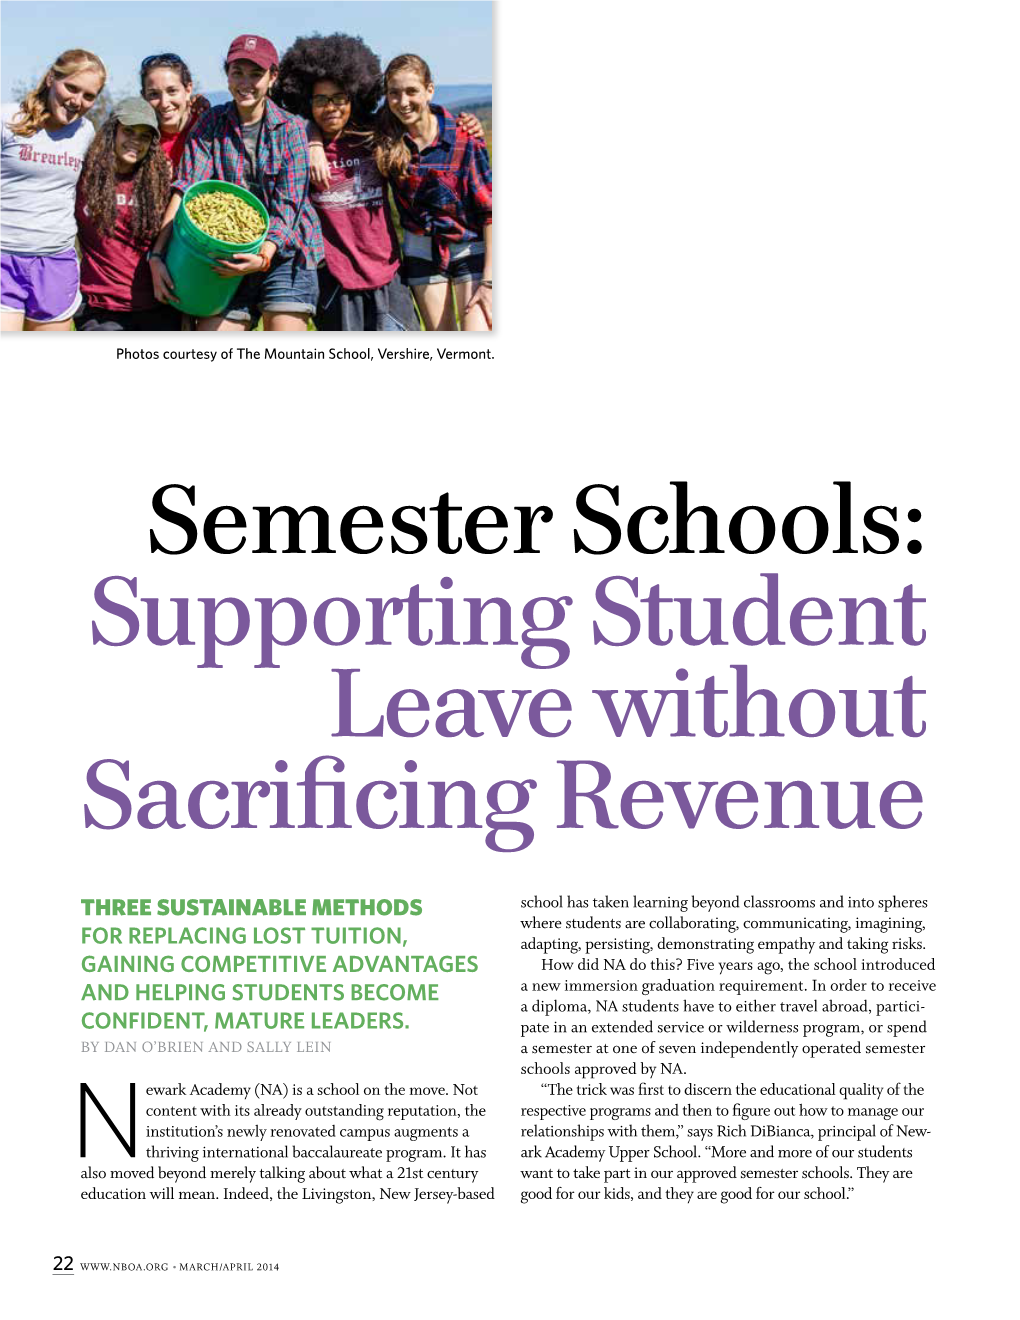 Semester Schools: Supporting Student Leave Without Sacrificing